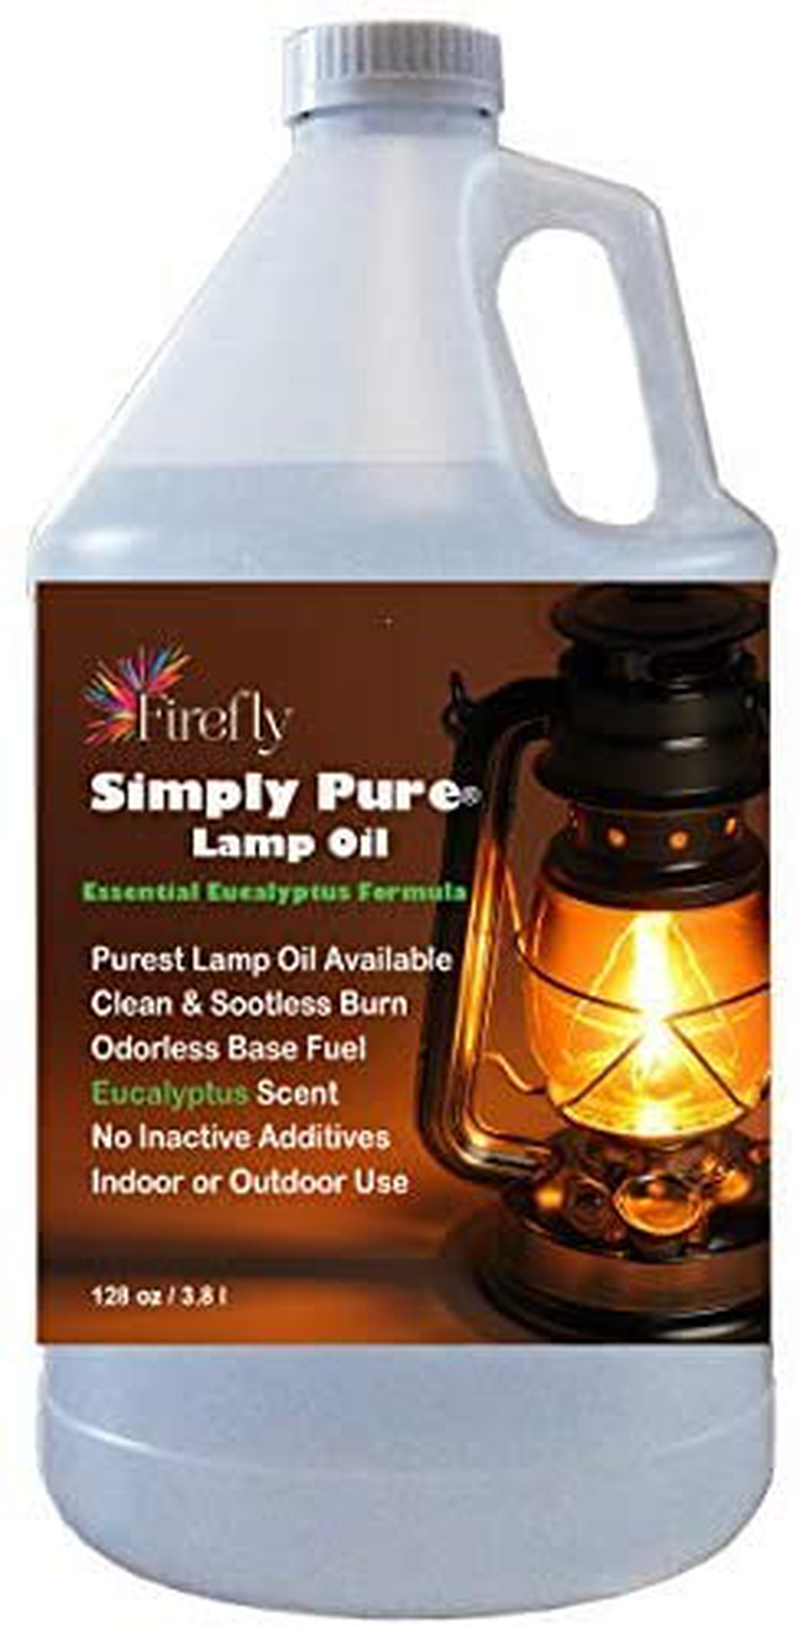 Firefly Kosher Candle and Lamp Oil - Smokeless & Odorless Base - Eucalyptus Scent - Ultra Clean Burning - Liquid Paraffin Fuel - Highest Purity Available - 32 oz Home & Garden > Lighting Accessories > Oil Lamp Fuel Firefly Fuel, Inc. 1 Gallon  